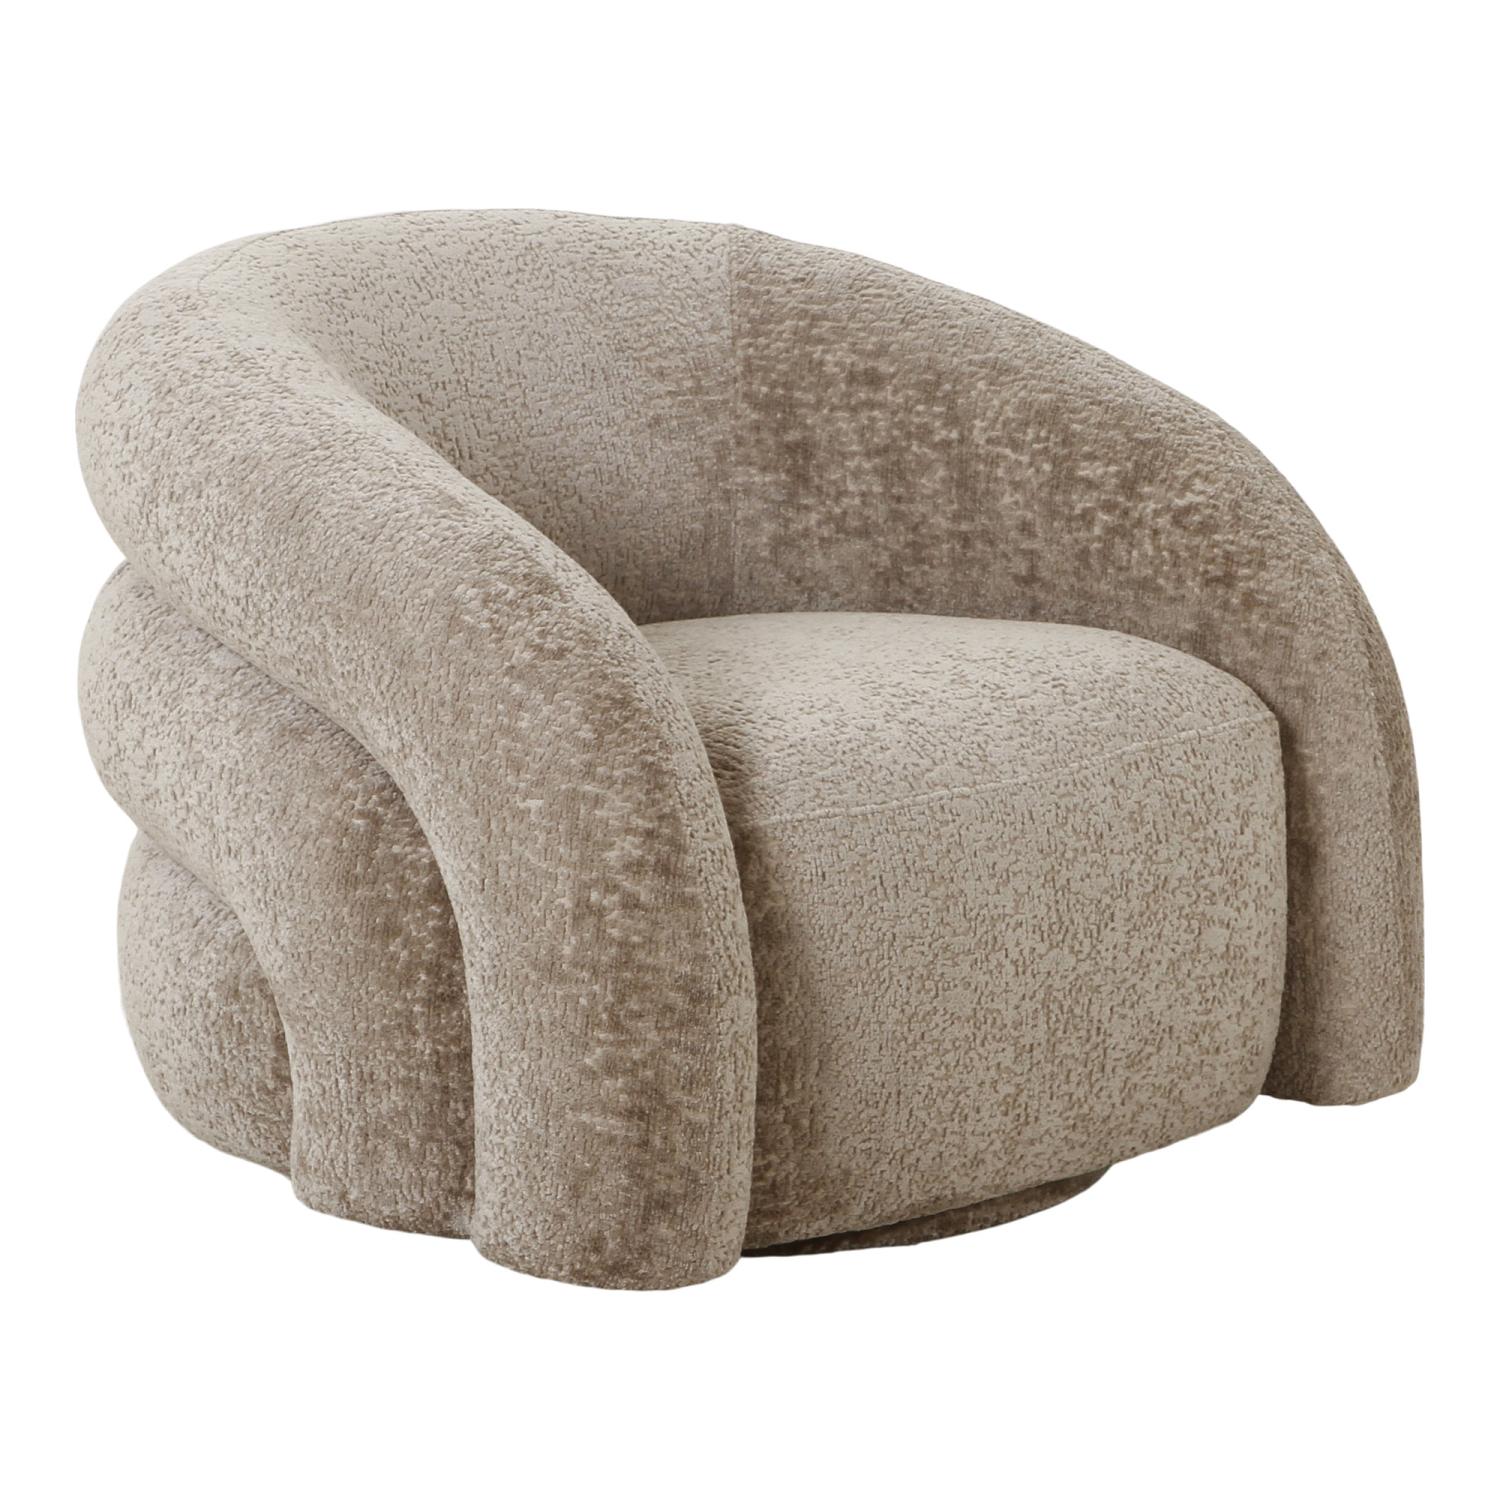 Valletta Lounge Chair with swivel function